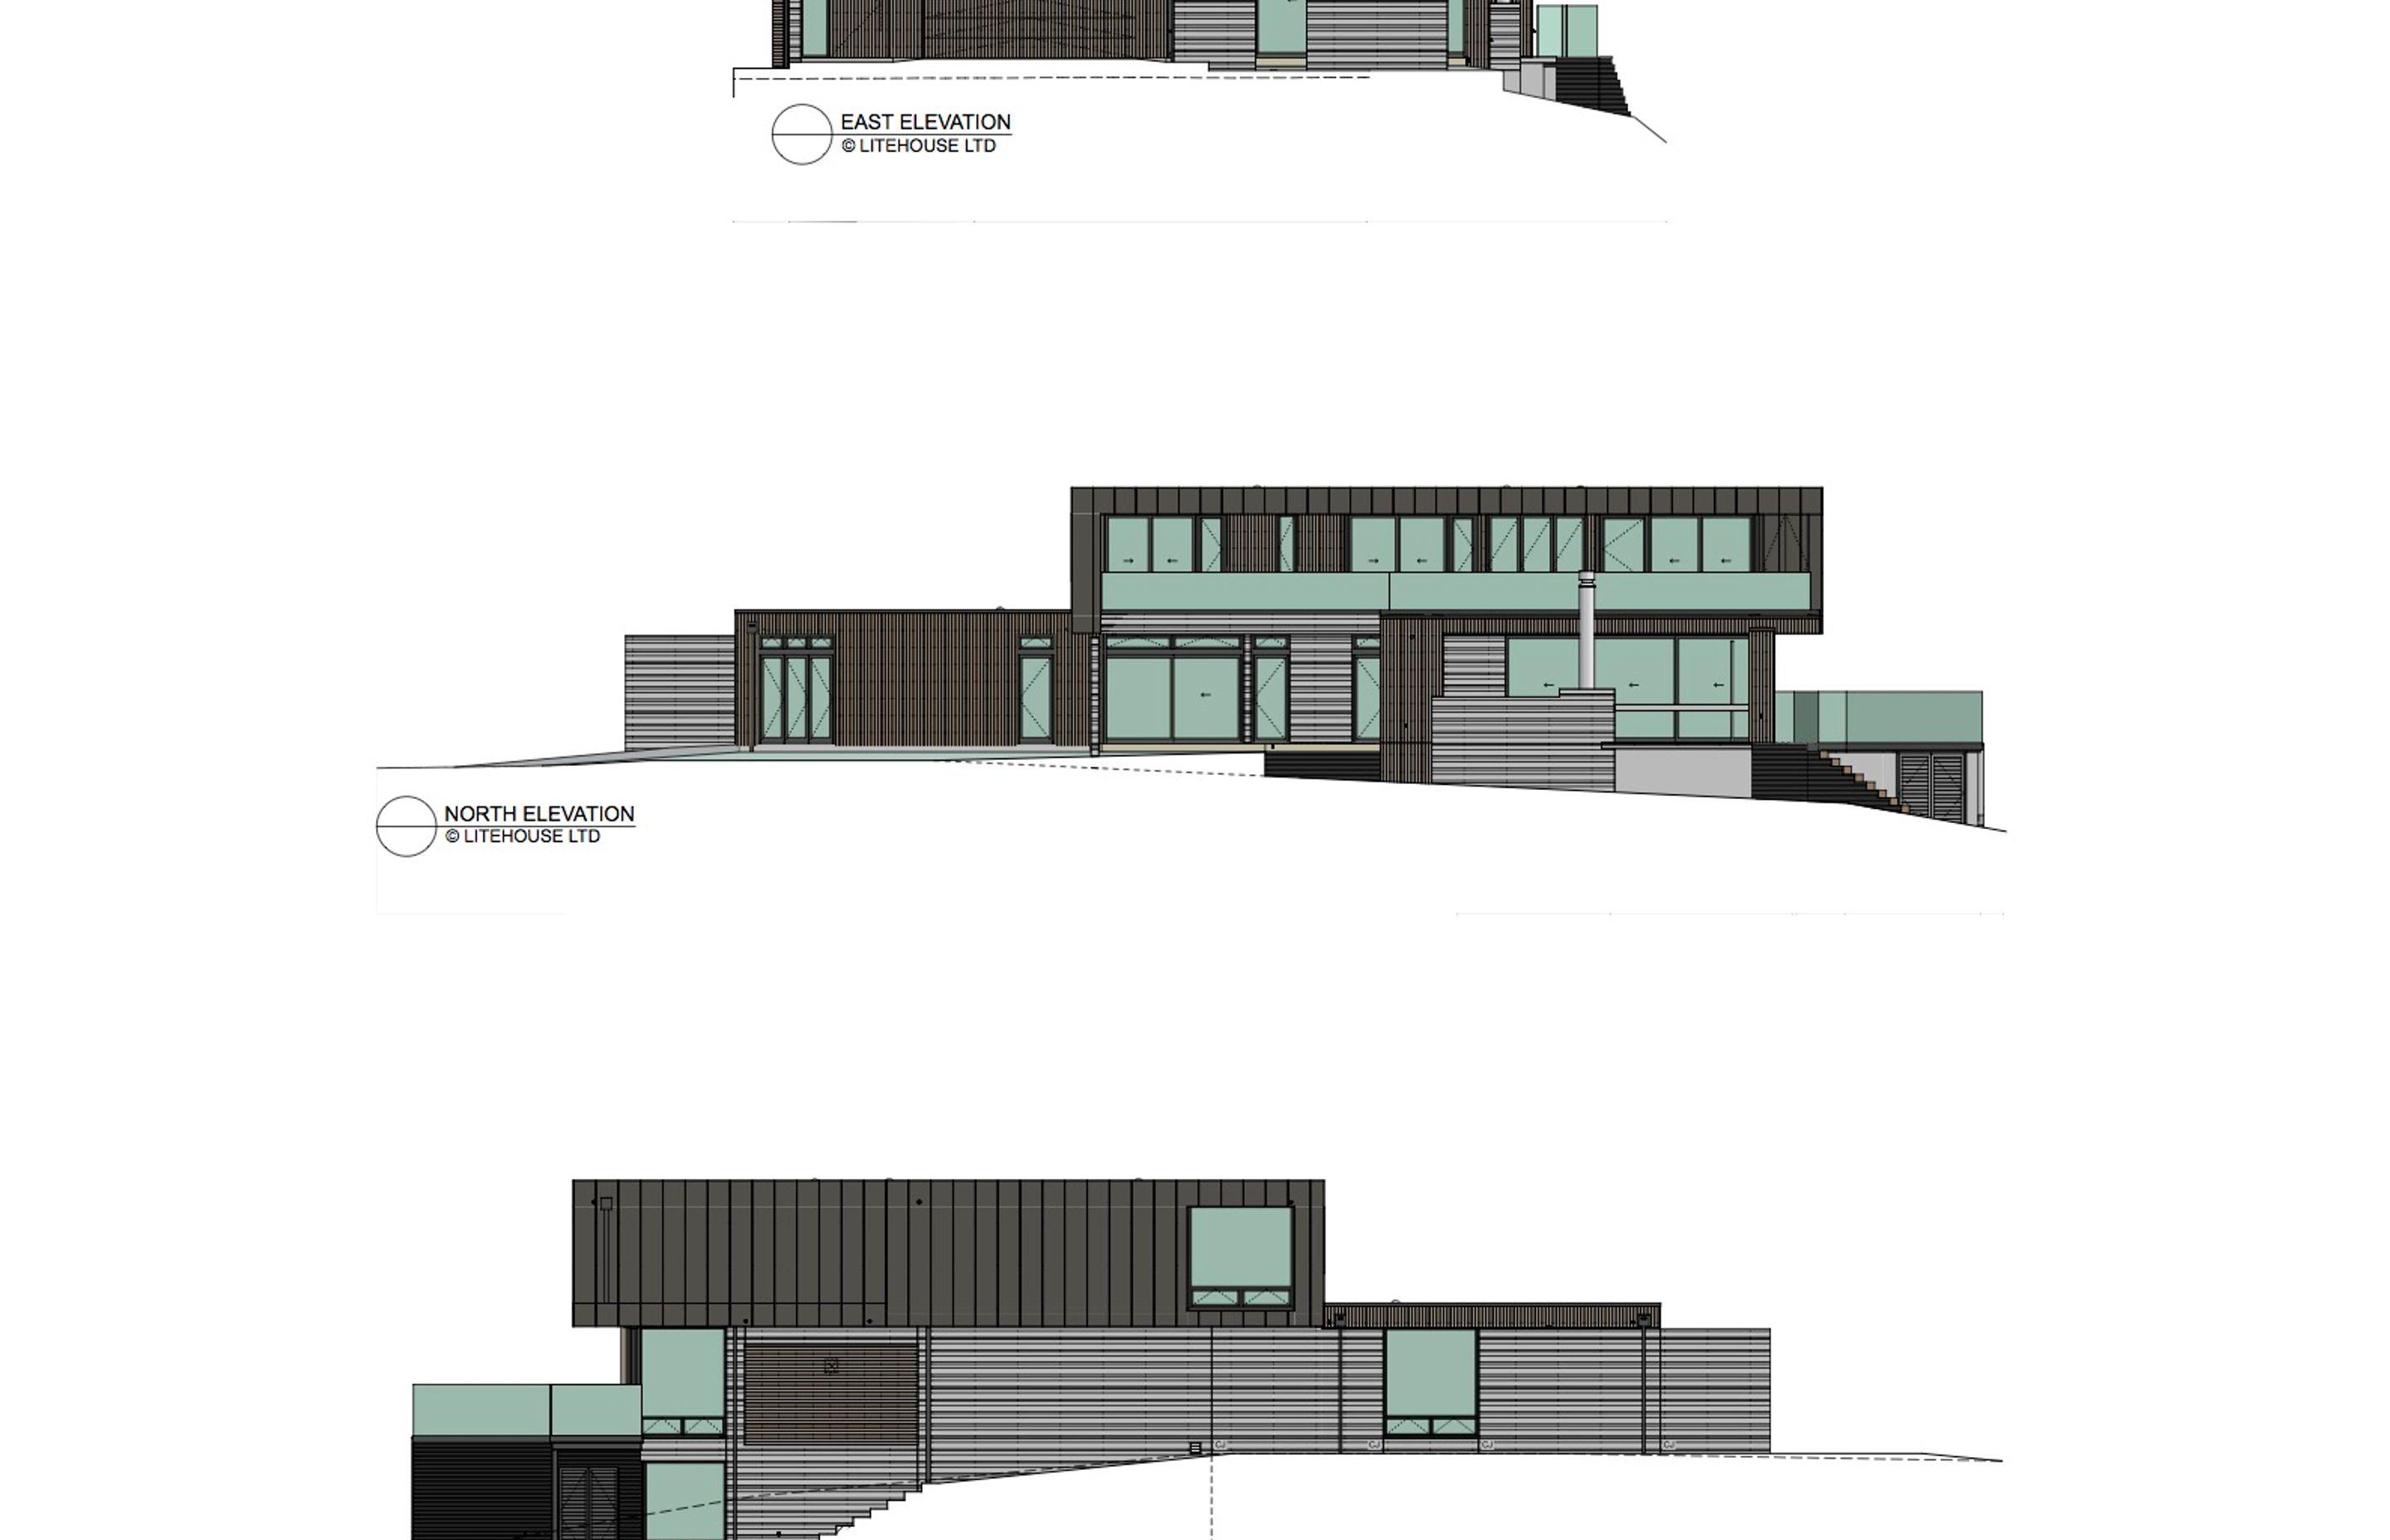 Elevations from the top: east, north and south, by Lite House.